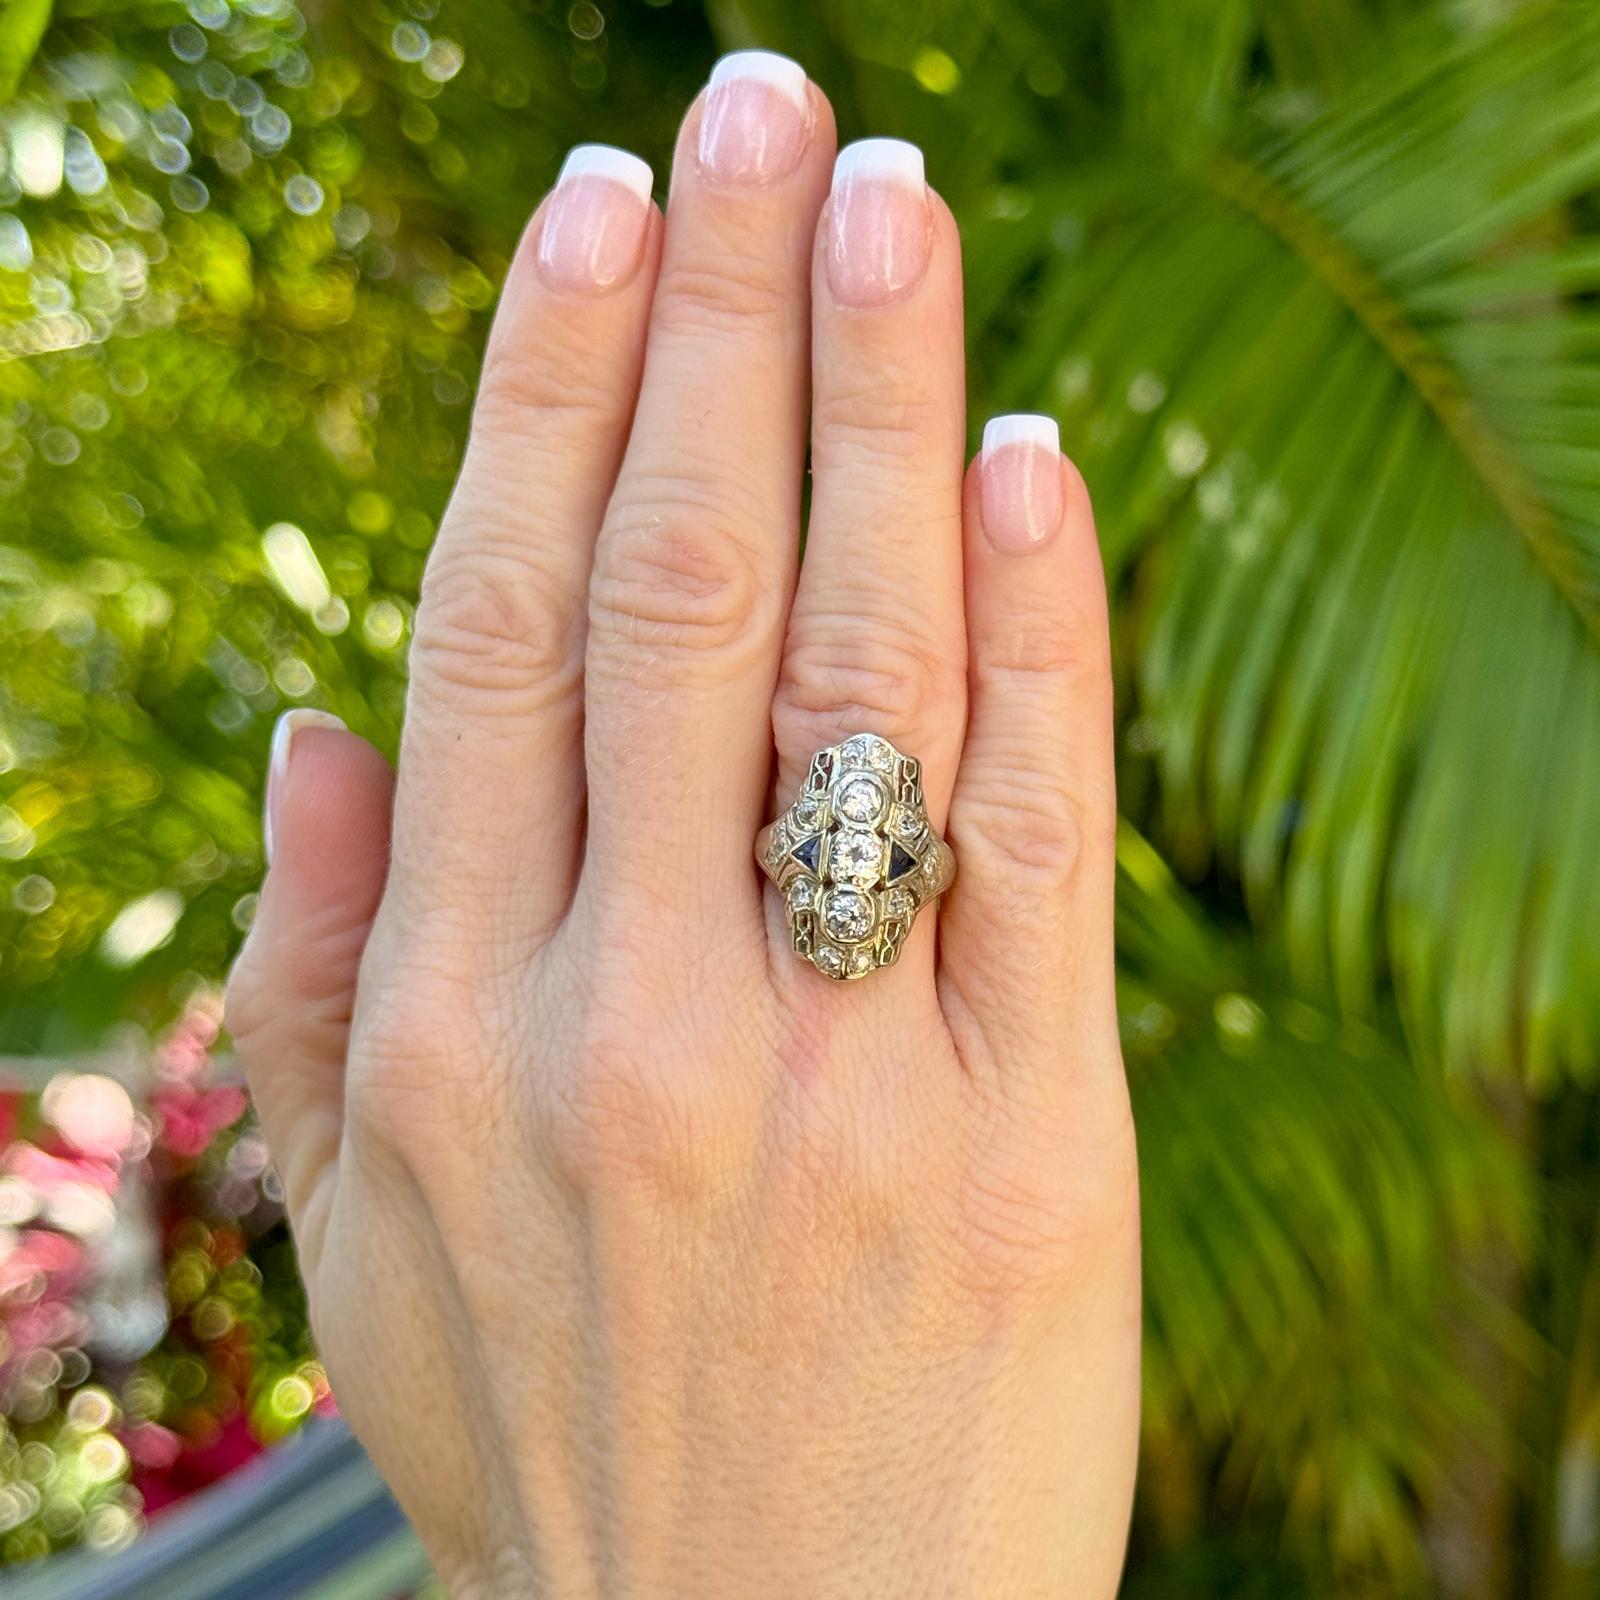 Art Deco Old European Cut Diamond 18 Karat White Gold Elongated Cocktail Ring In Excellent Condition For Sale In Boca Raton, FL